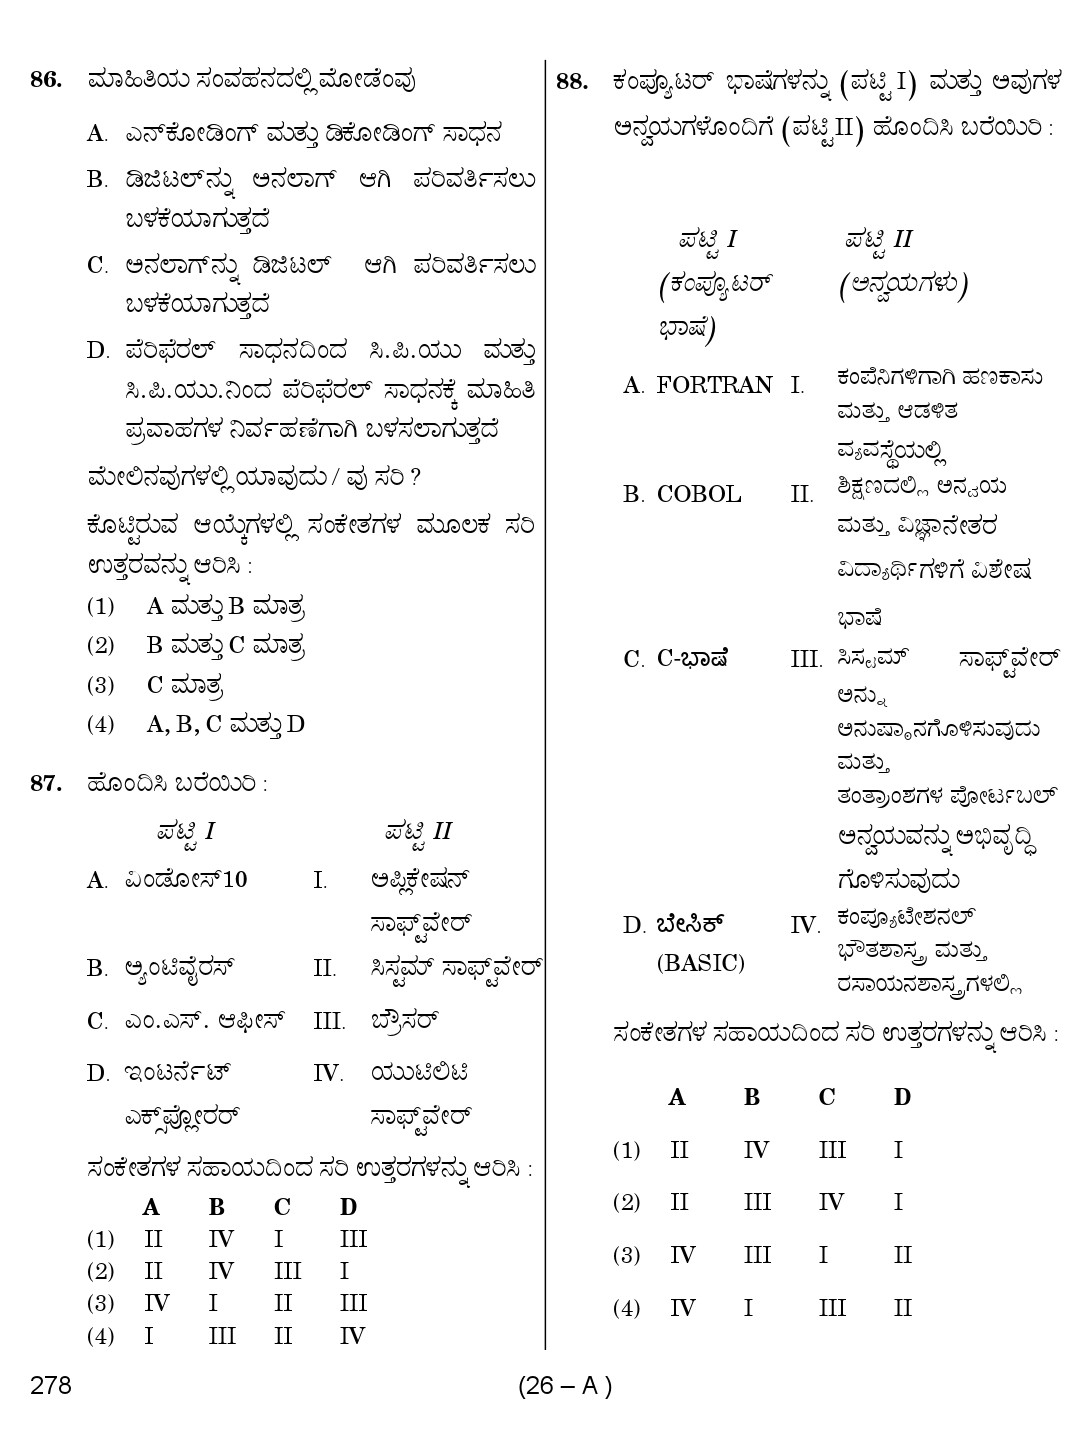 Karnataka PSC First Division Computer Assistants Exam Sample Question Paper 278 26